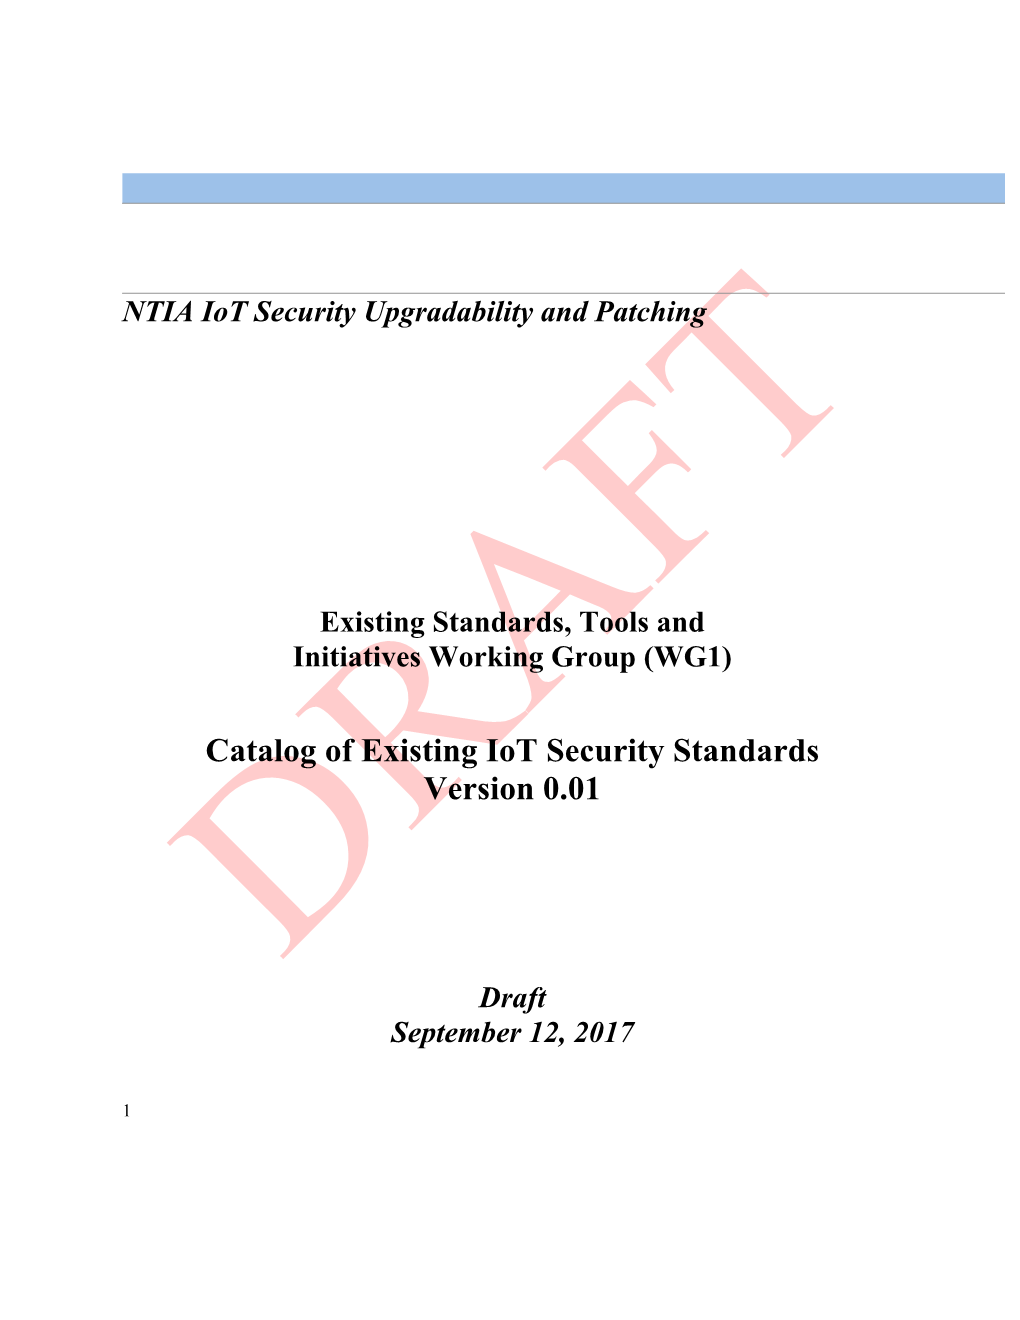 Catalog of Existing Iot Security Standards Version 0.01